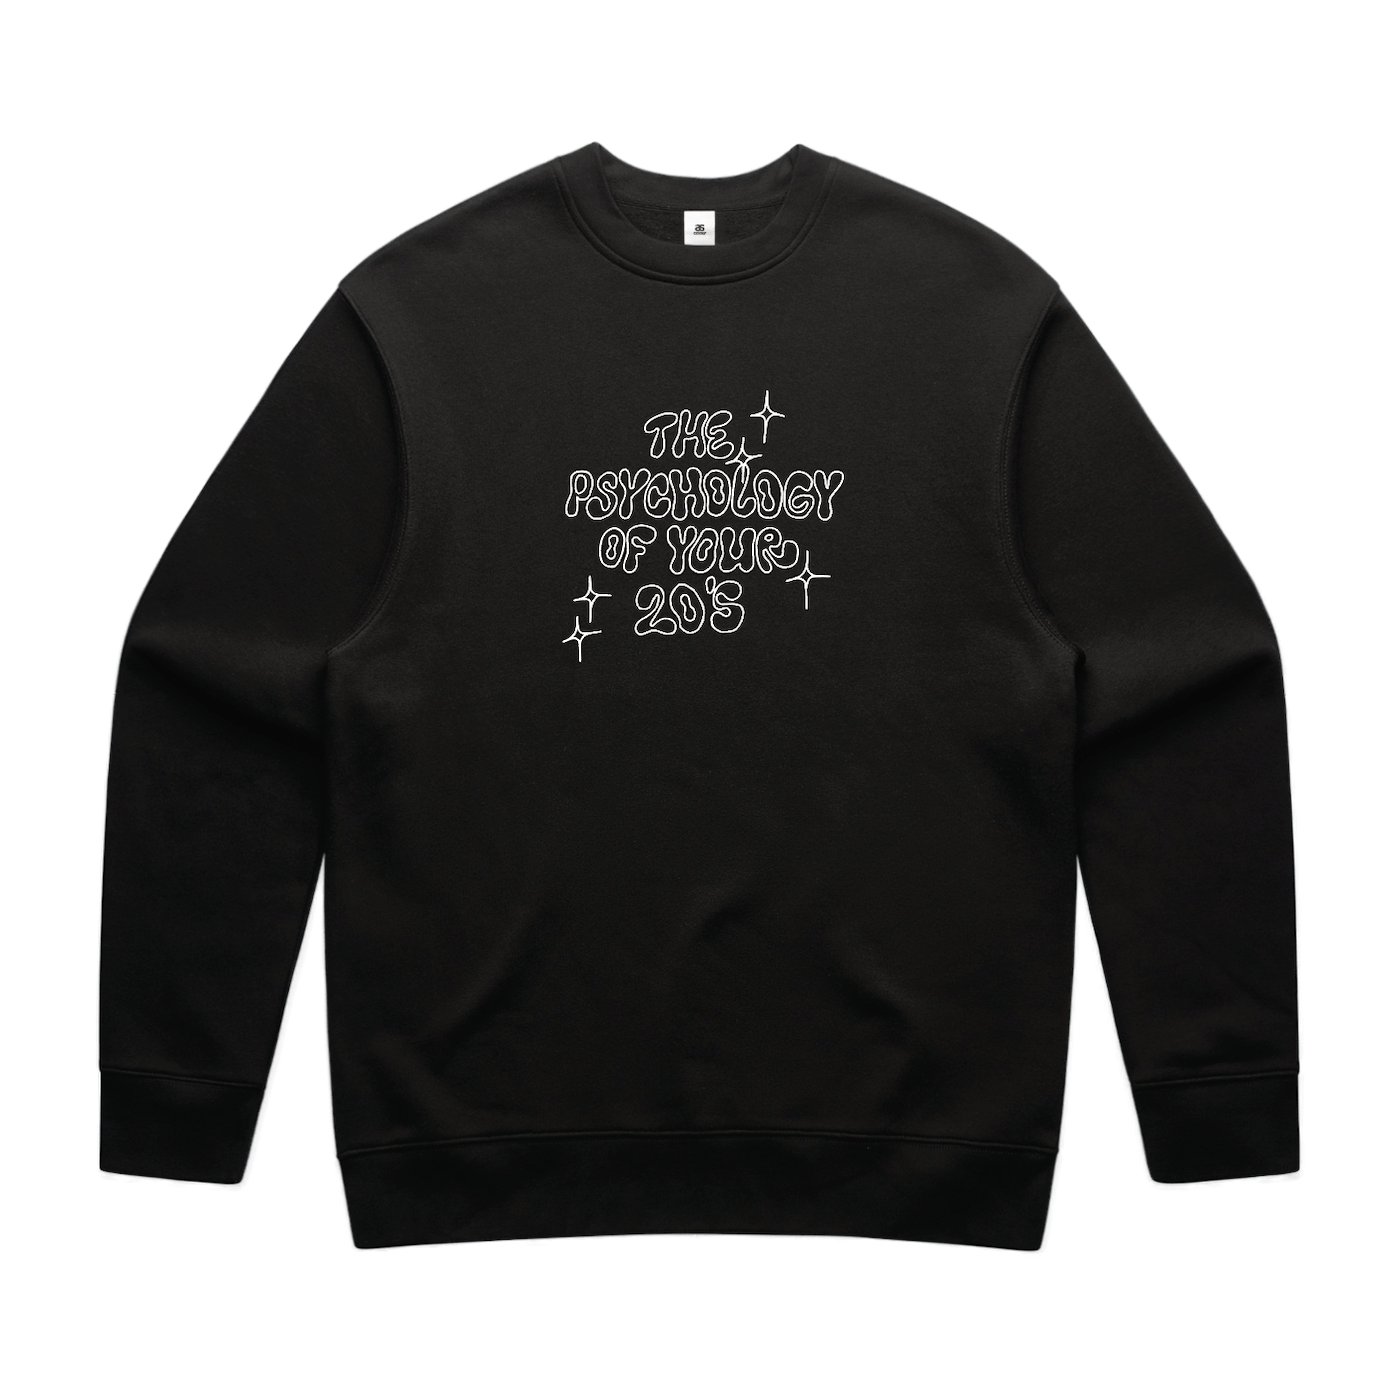 The Psychology of Your 20's - Crewneck